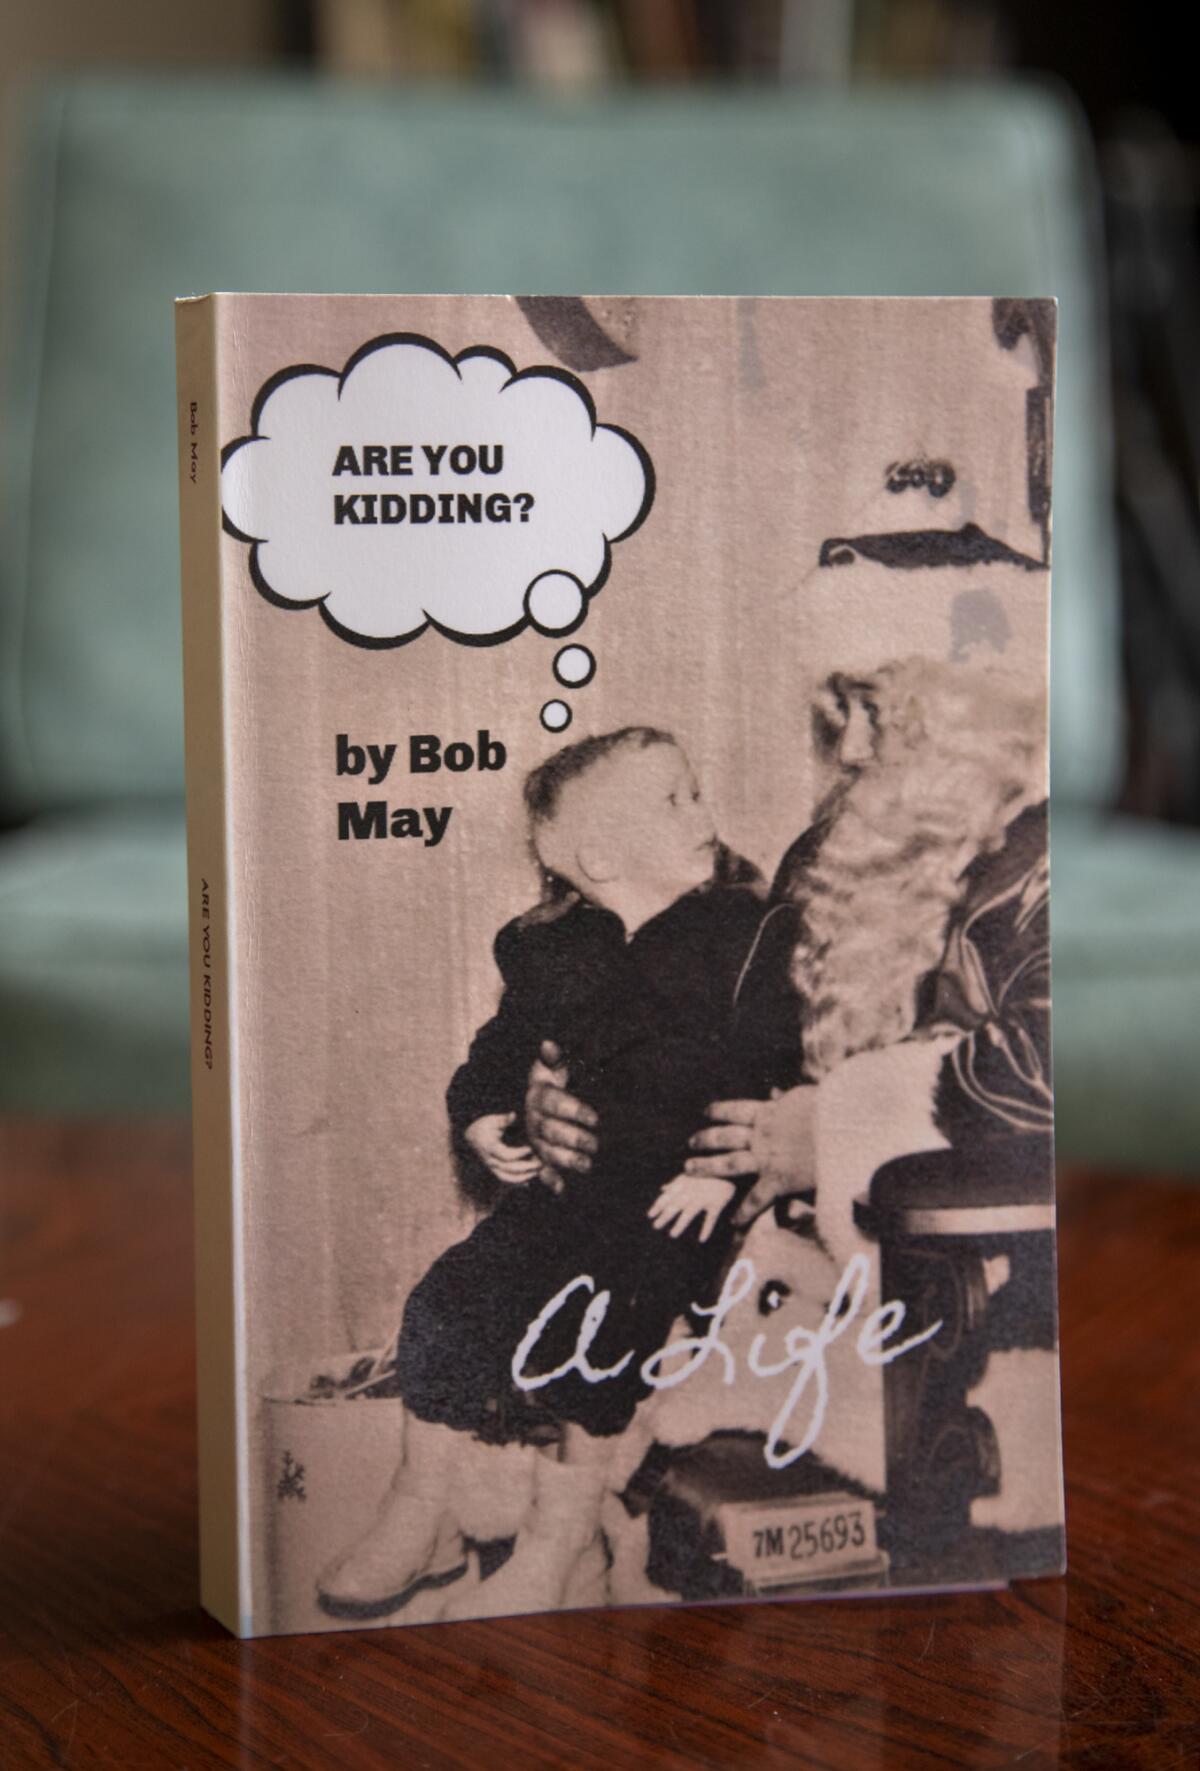 Bob May's memoir, "Are You Kidding?: A Life," published in 2021